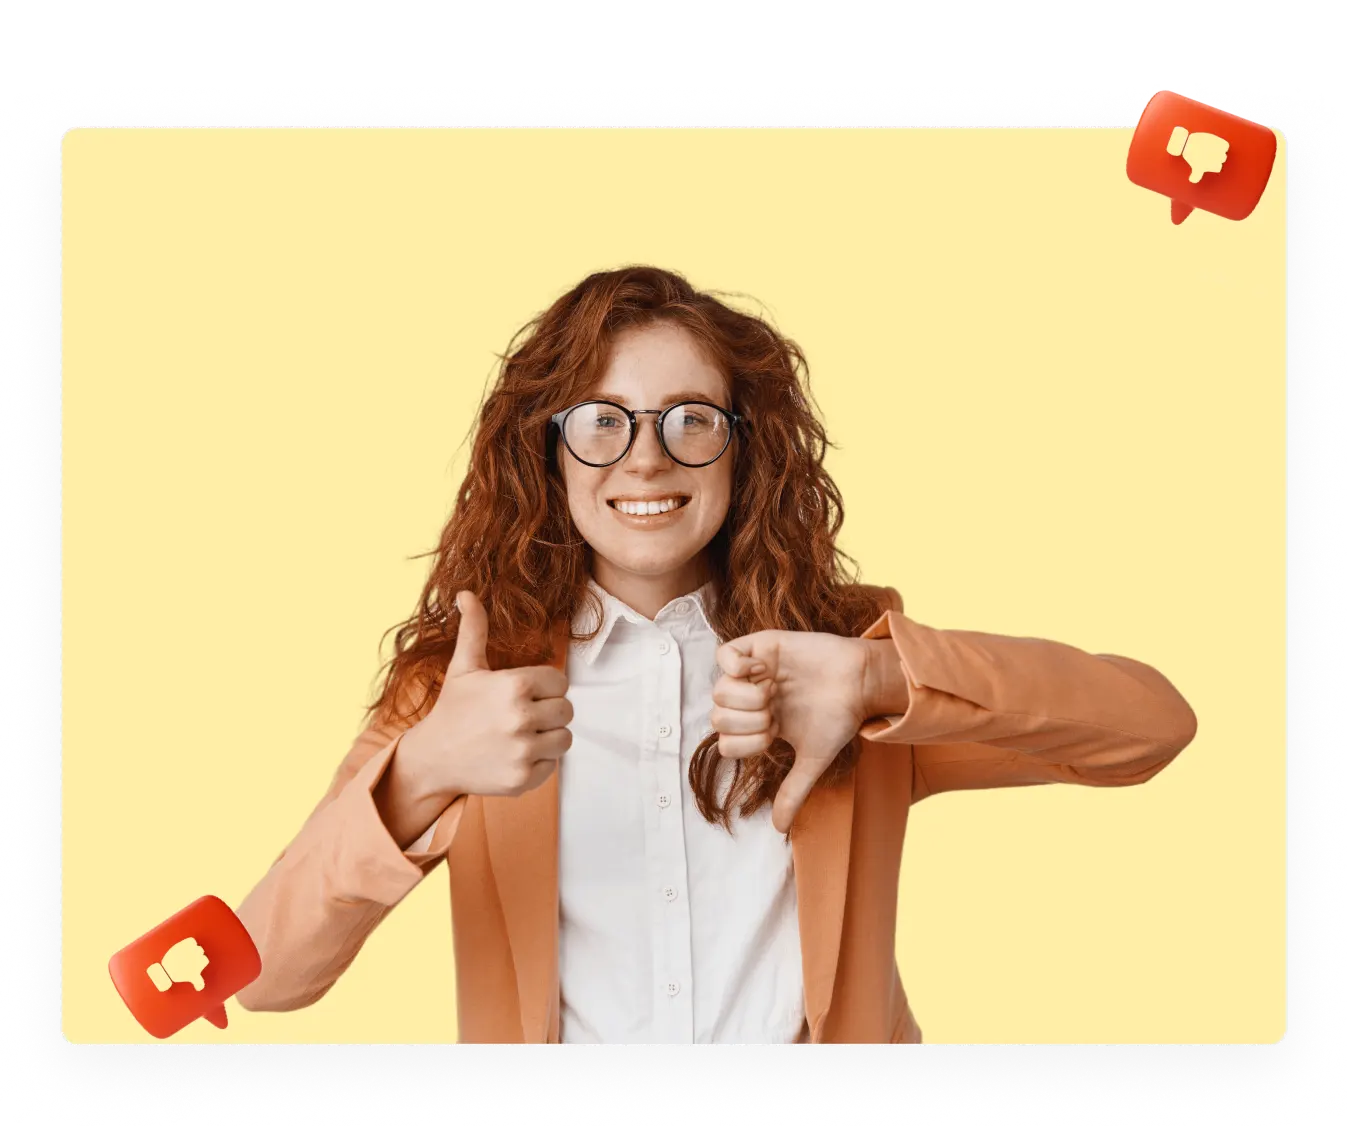 Girl showing thumbs up and down